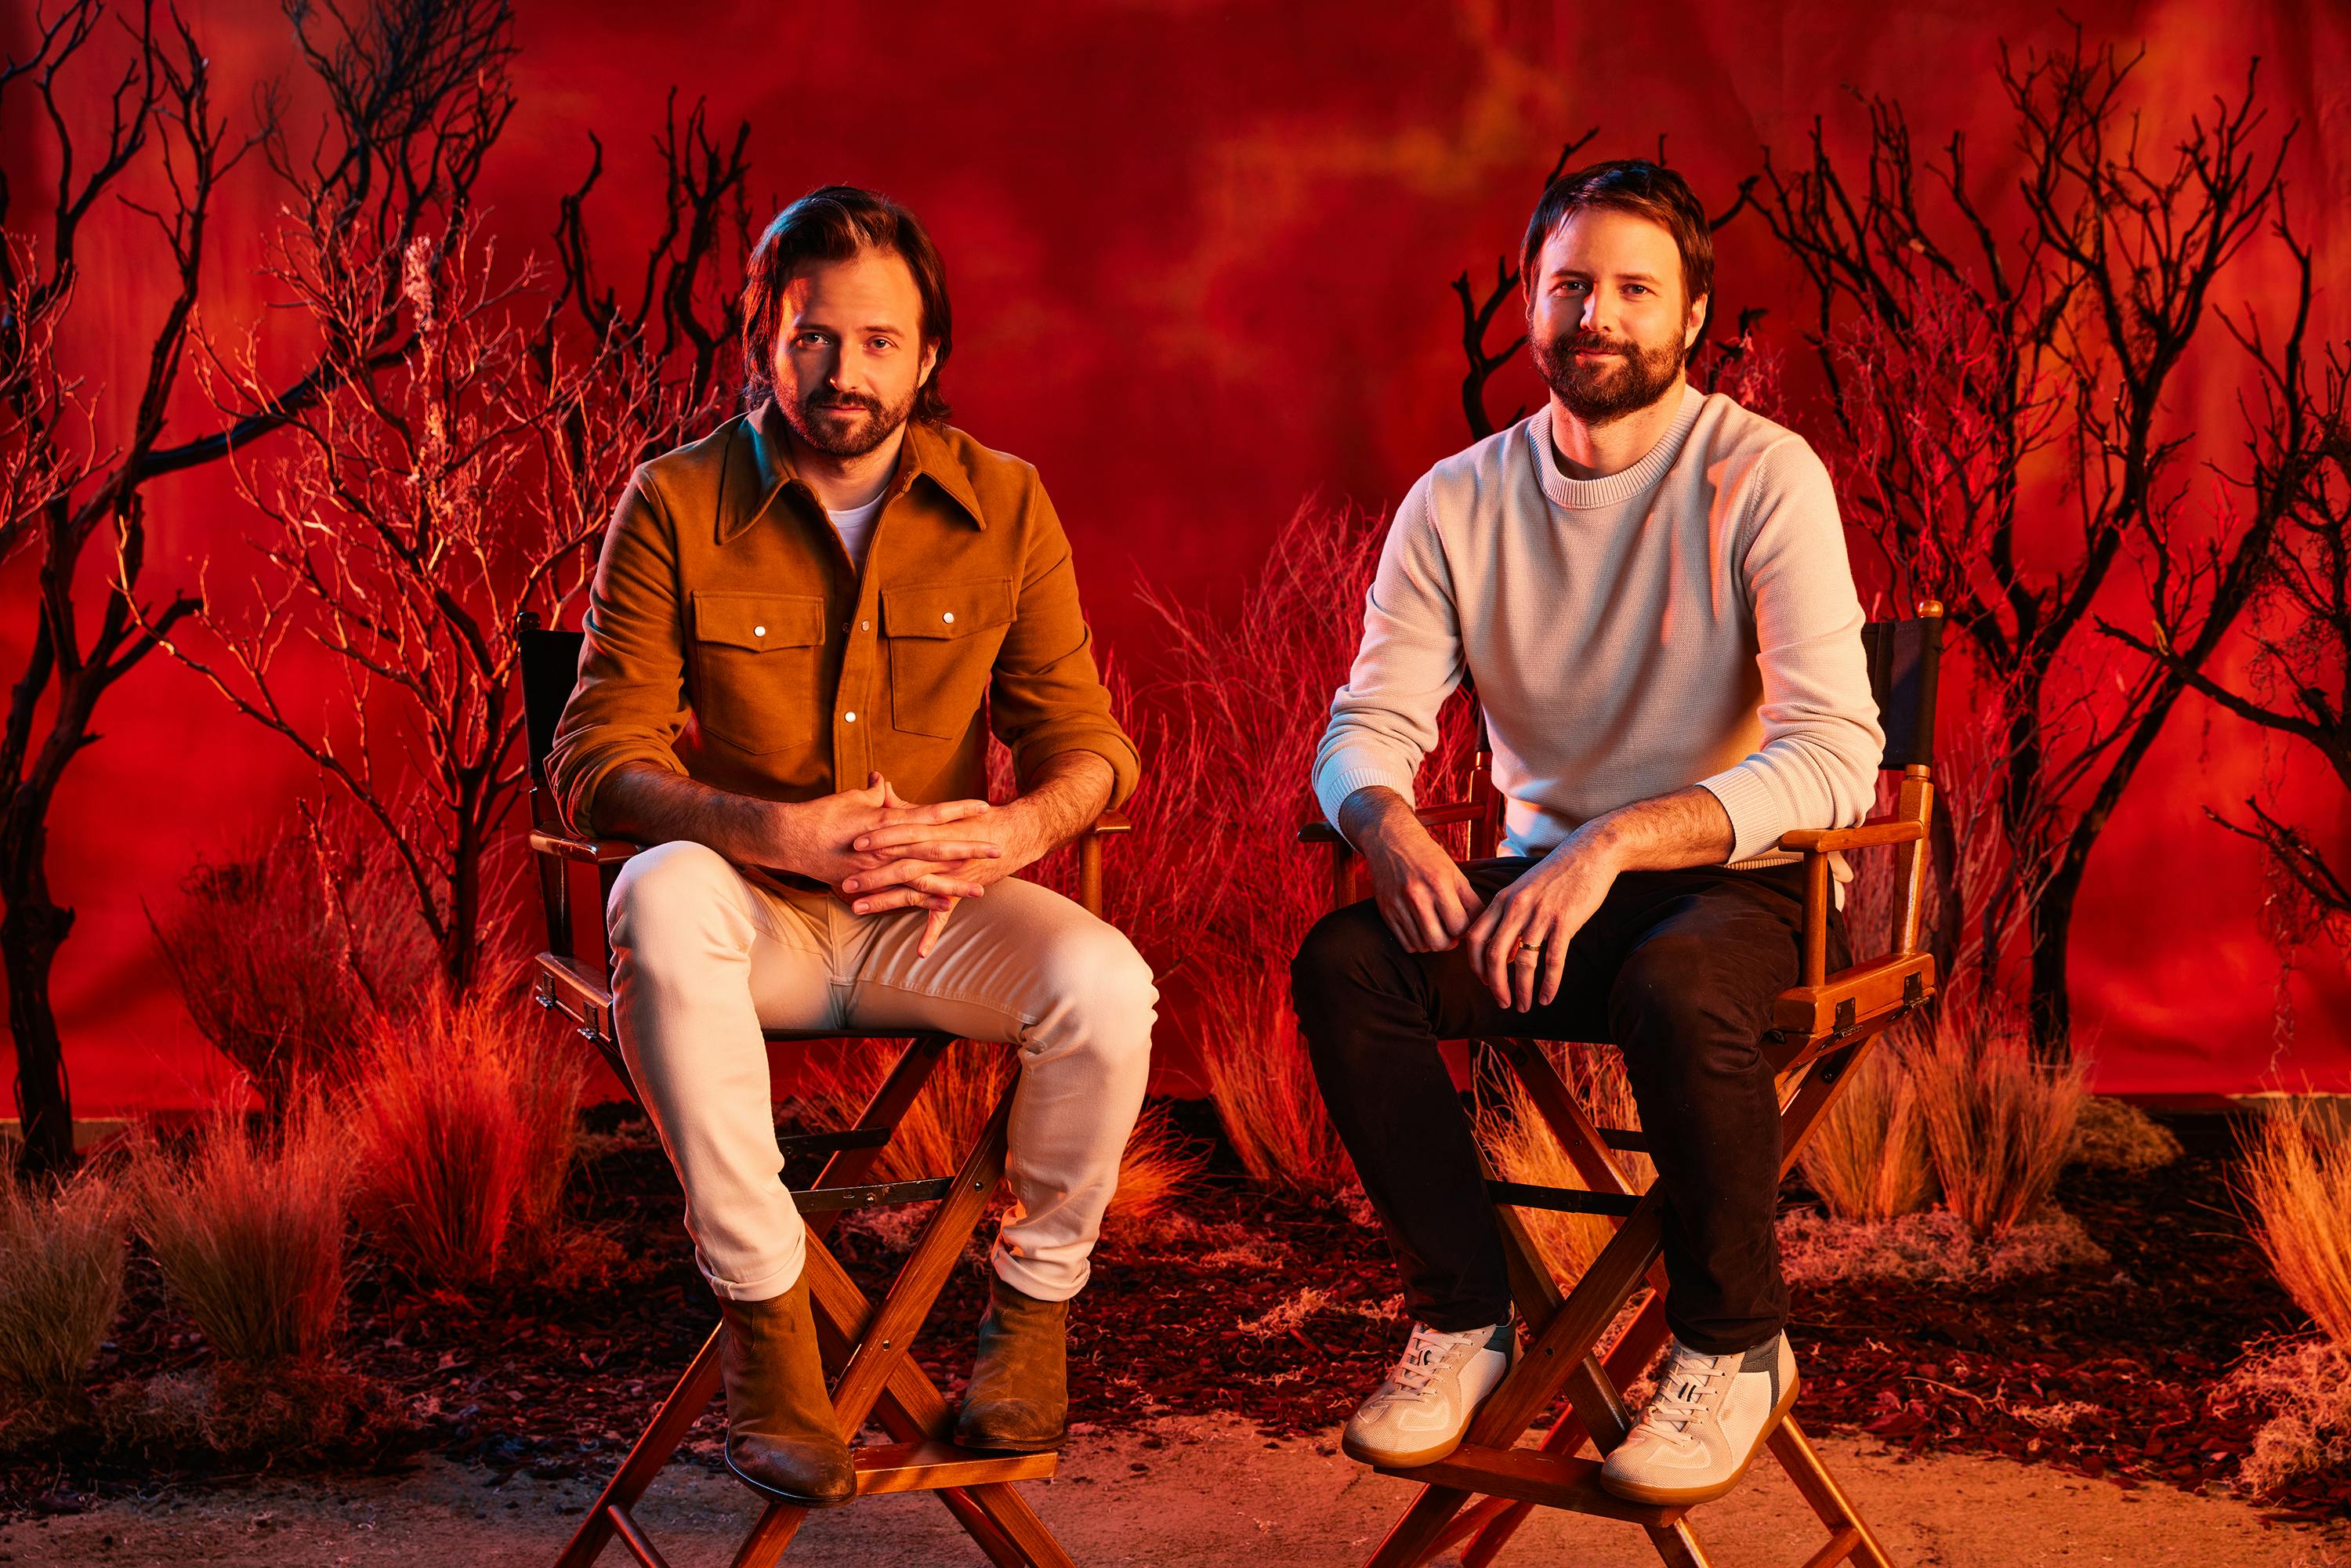 Matt and Ross Duffer sit in directors chairs against a fiery red backdrop.